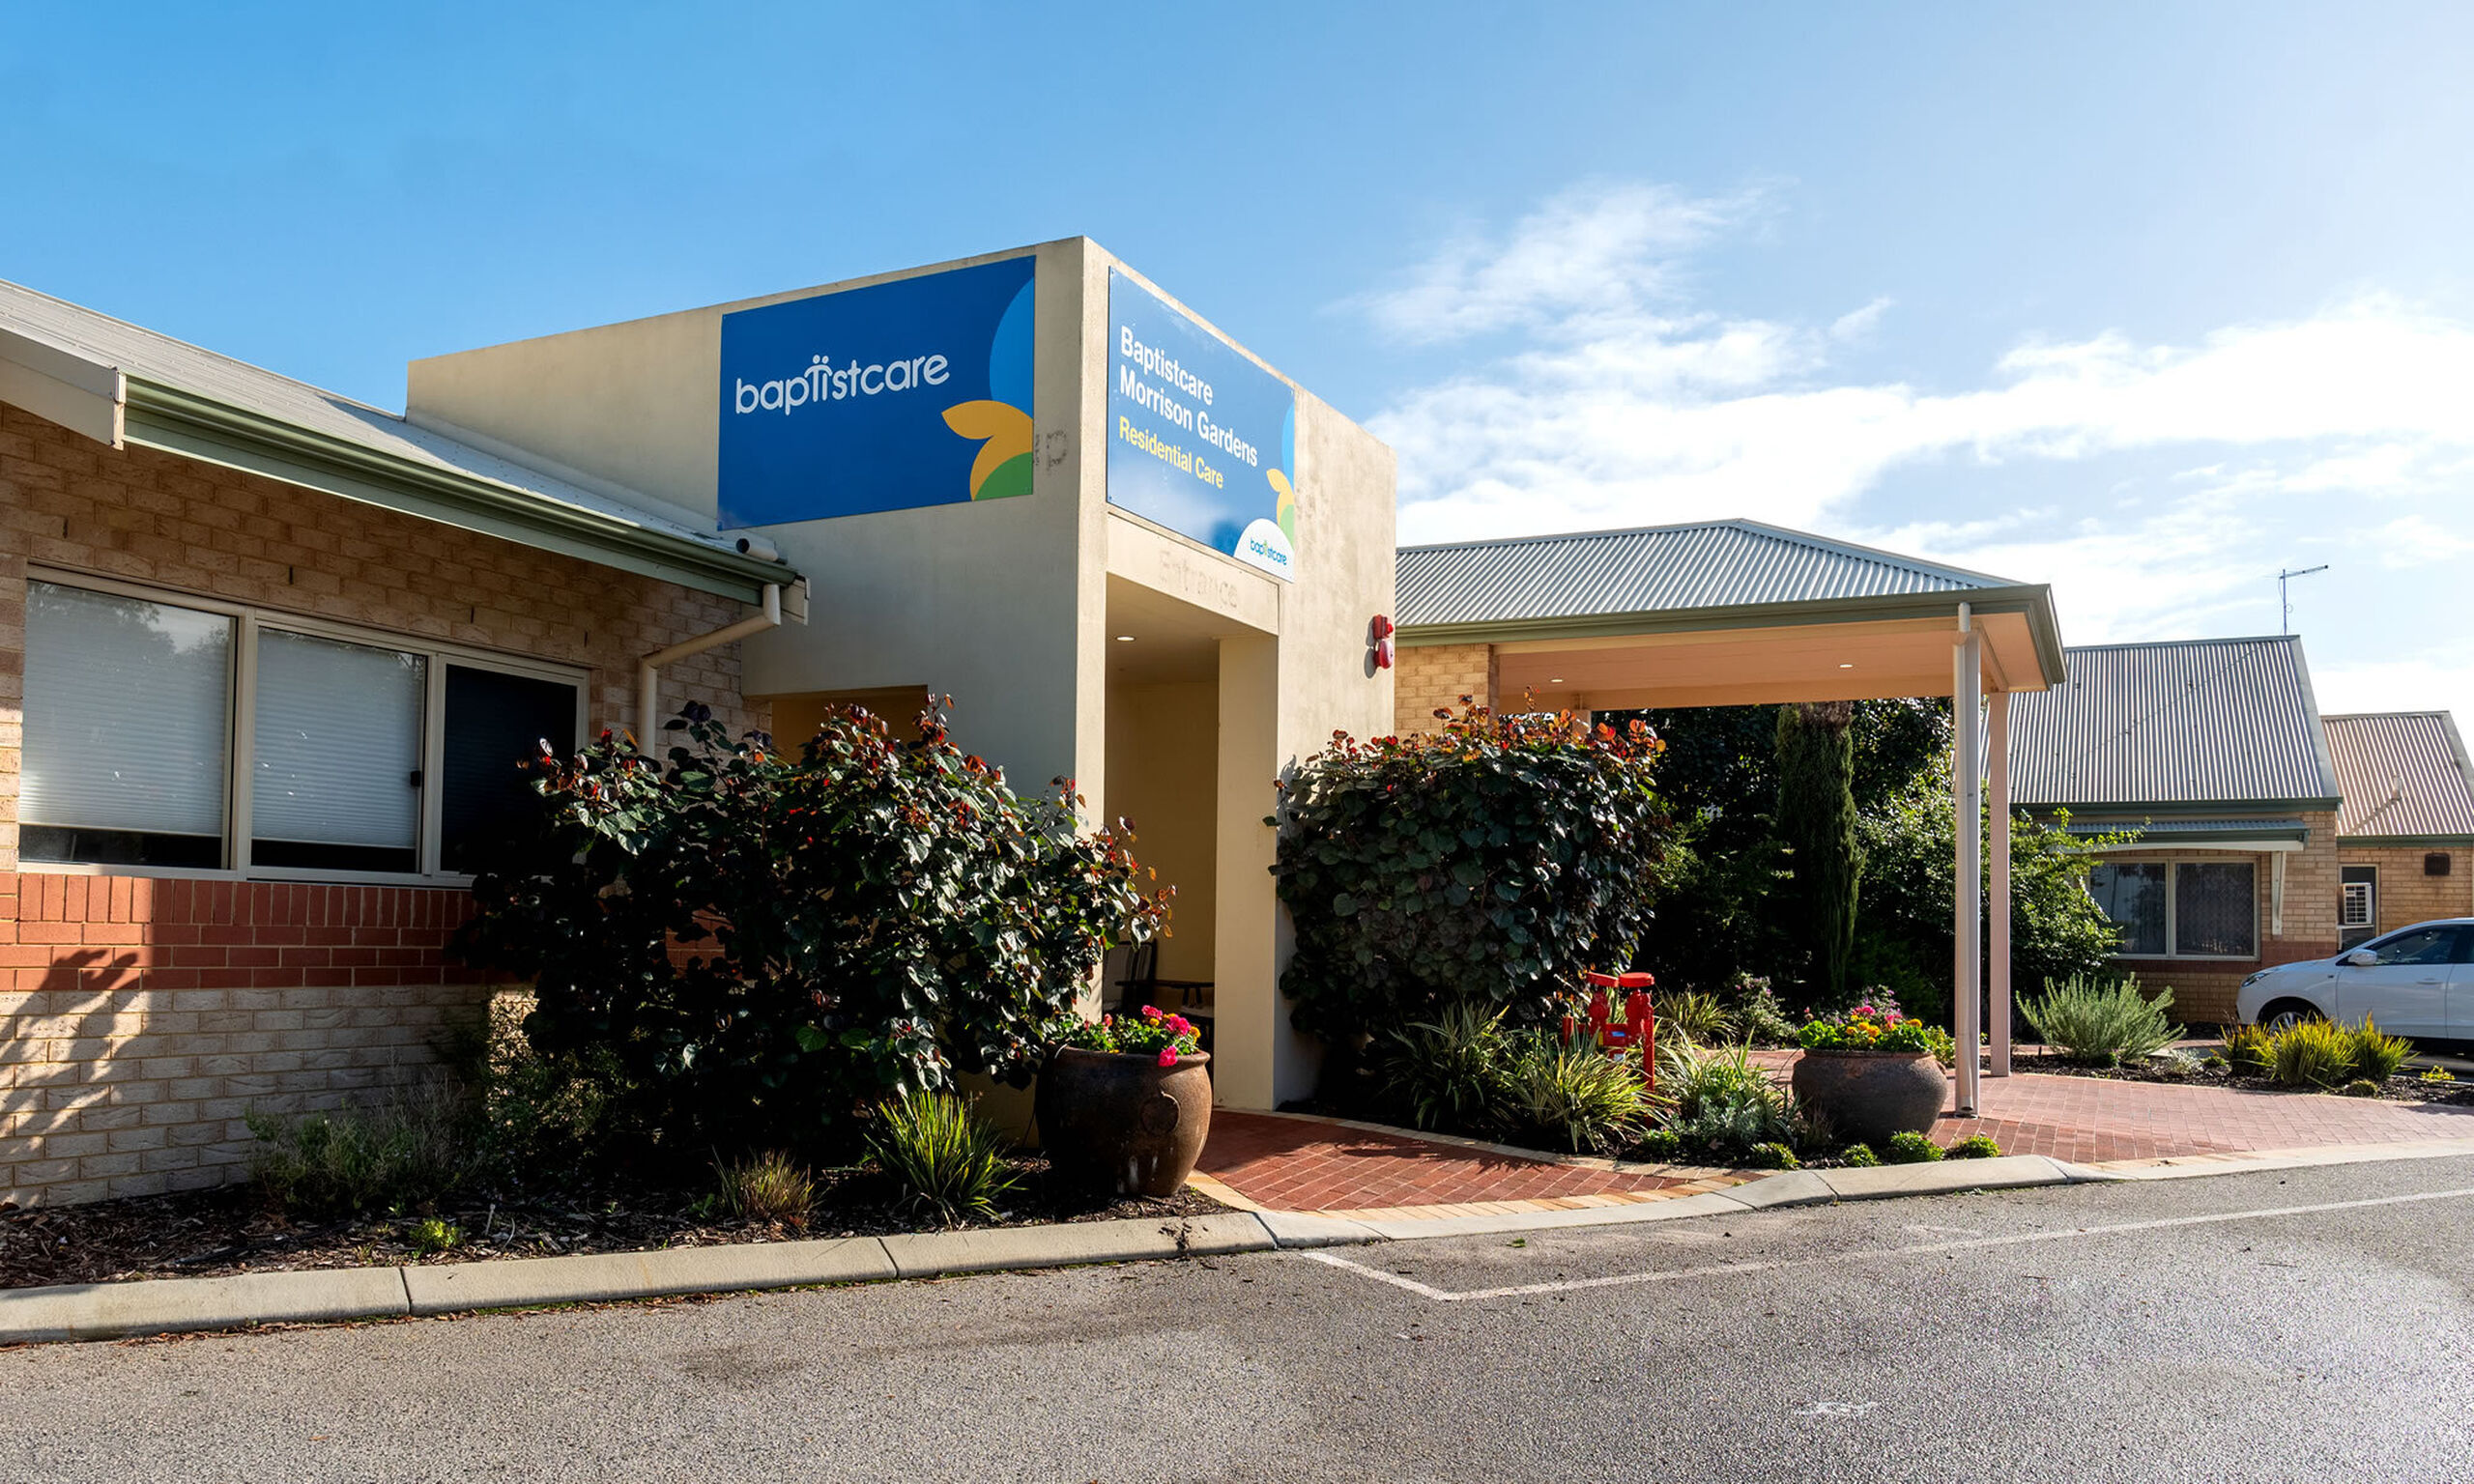 main entry for nursing home residents at baptistcare morrison gardens aged care home in midland wa